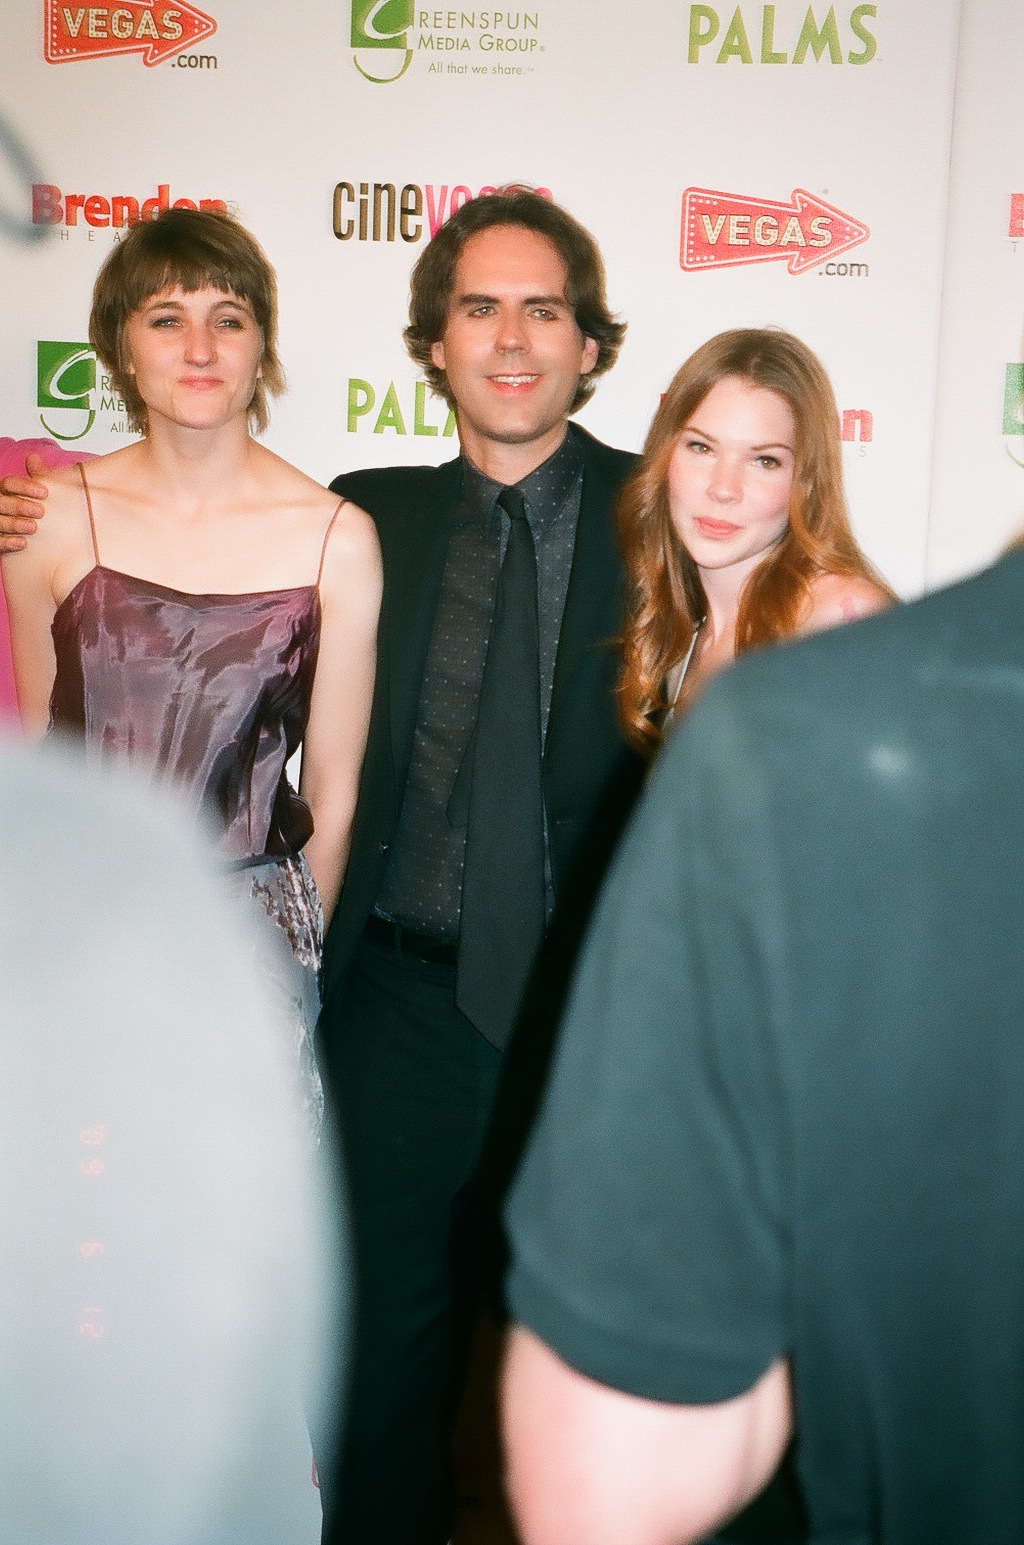 Molly Livingston, Jeremiah Turner, and Courtney Halverson at Etienne! Premiere at CineVegas red carpet